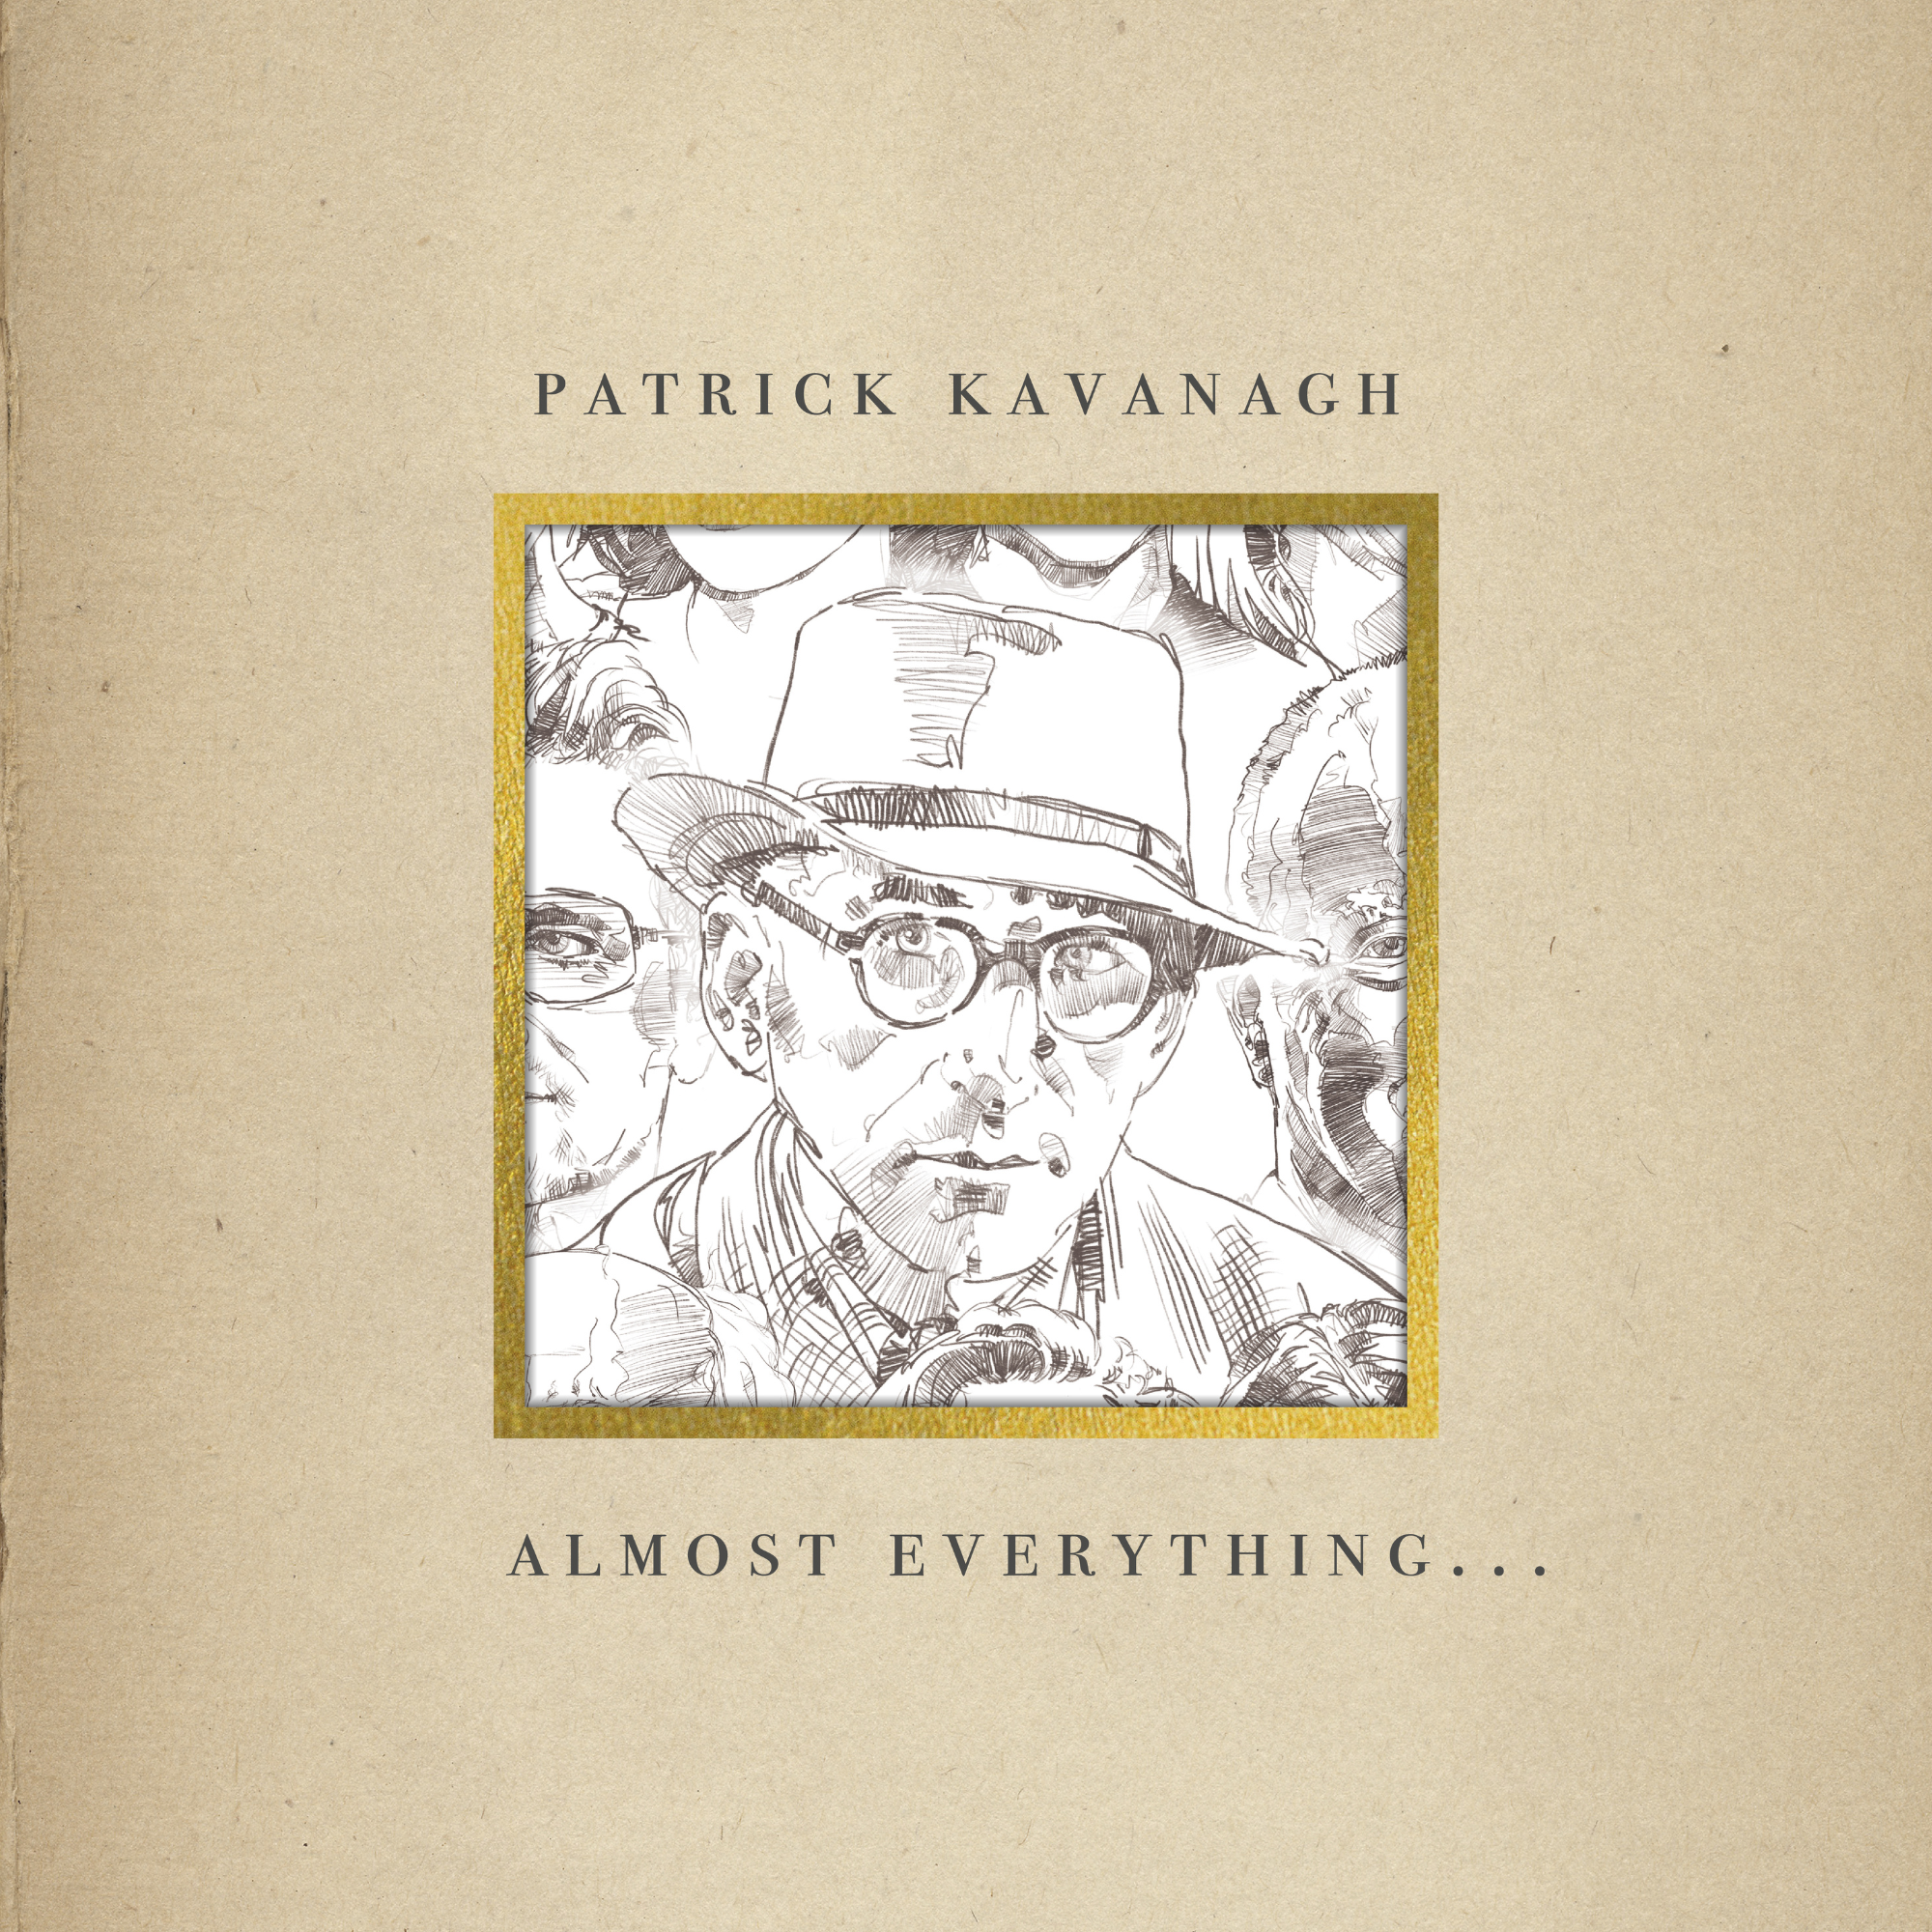 ALBUM ANNOUNCEMENT ¦ Patrick Kavanagh 'Almost Everything. .  .'